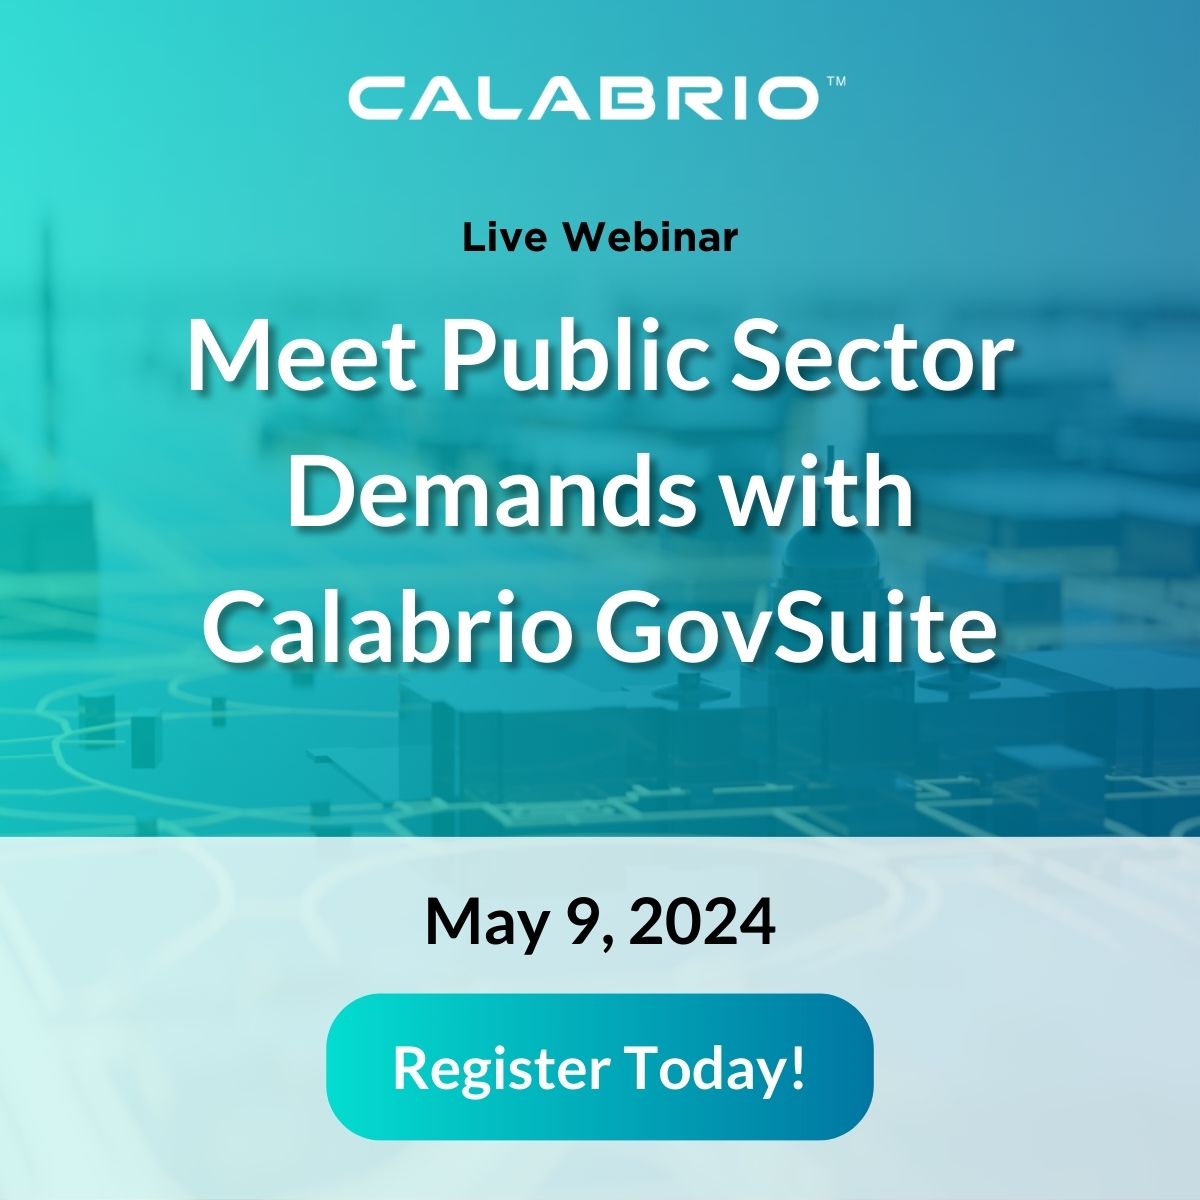 Calabrio GovSuite is now available for U.S. federal government agencies and departments! Join this May 9 webinar to learn challenges faced by public center contact centers, how GovSuite addresses these unique requirements, and more: bit.ly/3QFActp